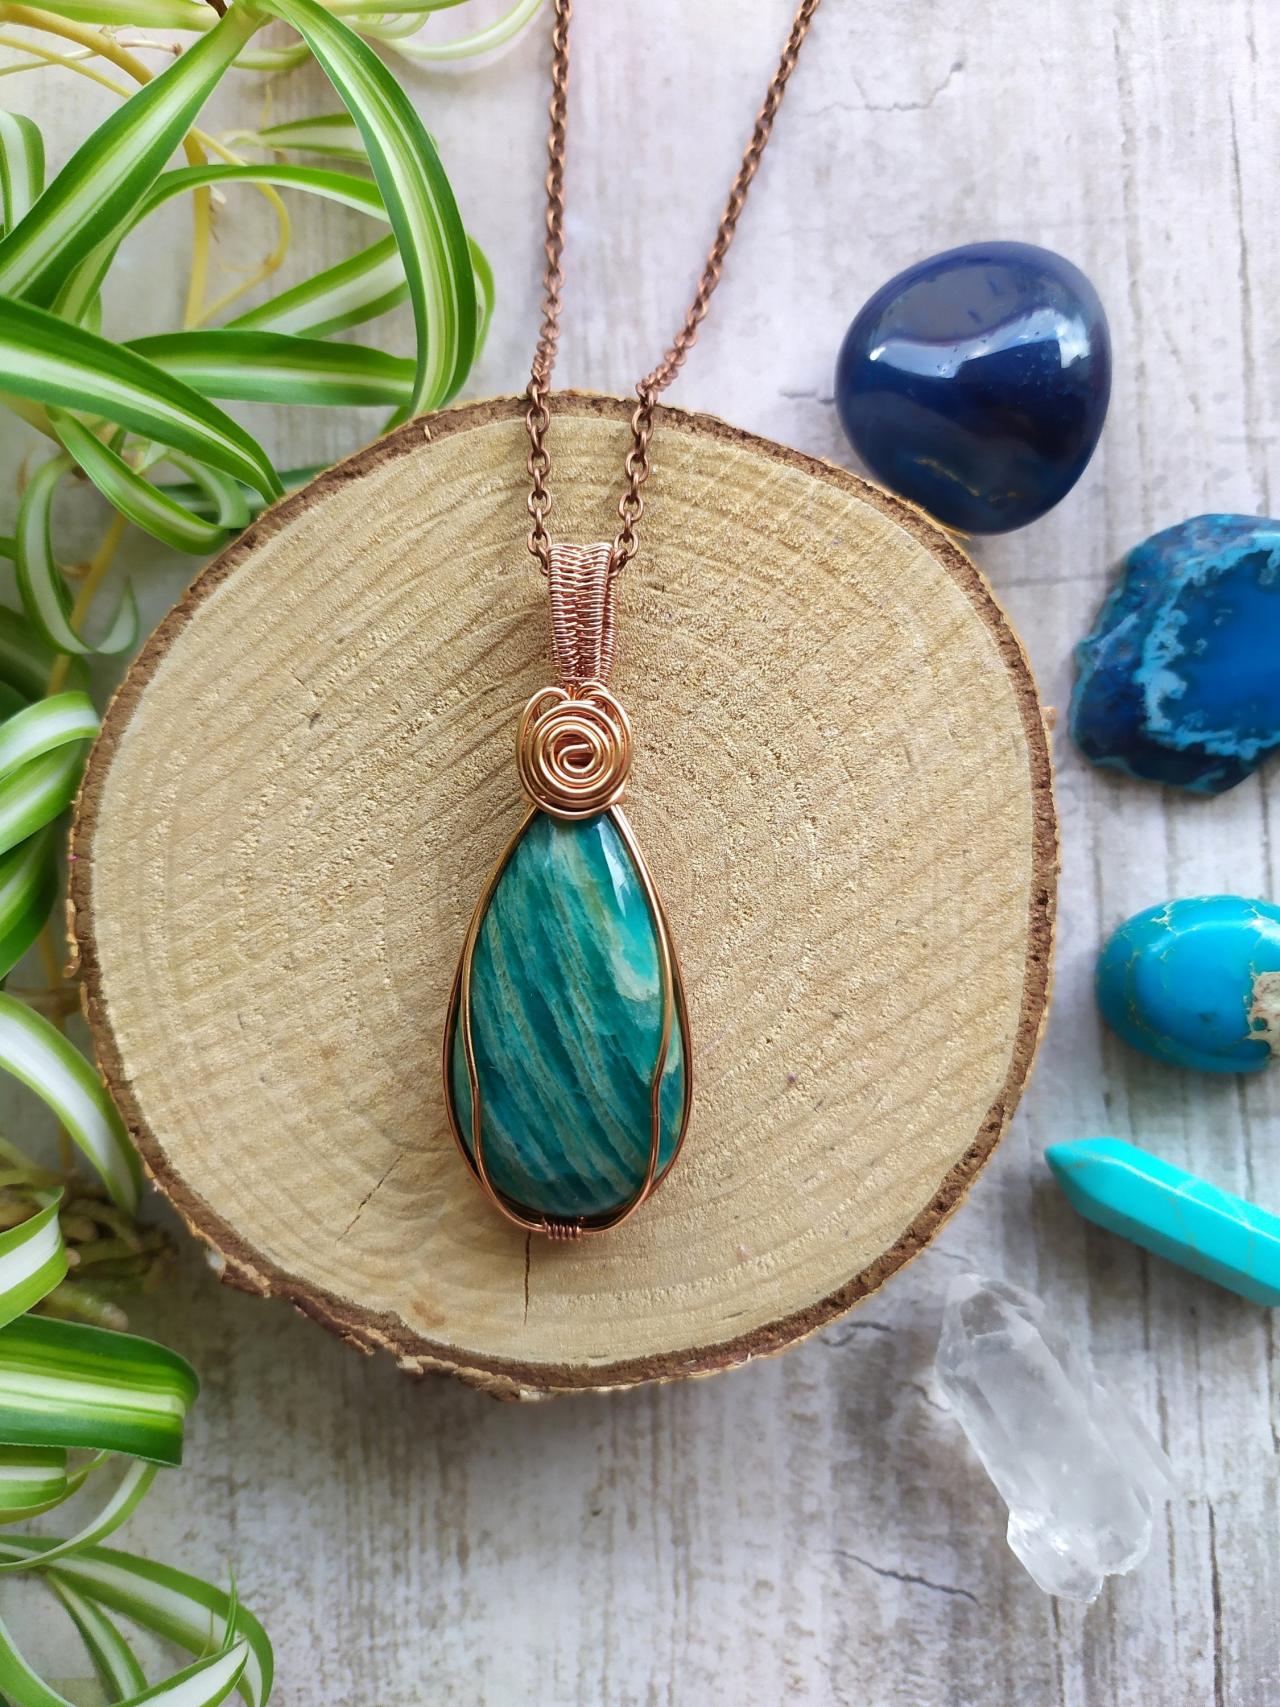 Spring Collection: Wire Wrapped Copper Amazonite Pendant, Green Turquoise Gemstone Necklace,large Teal Amazonite Cabochon Wire Wrap Necklace